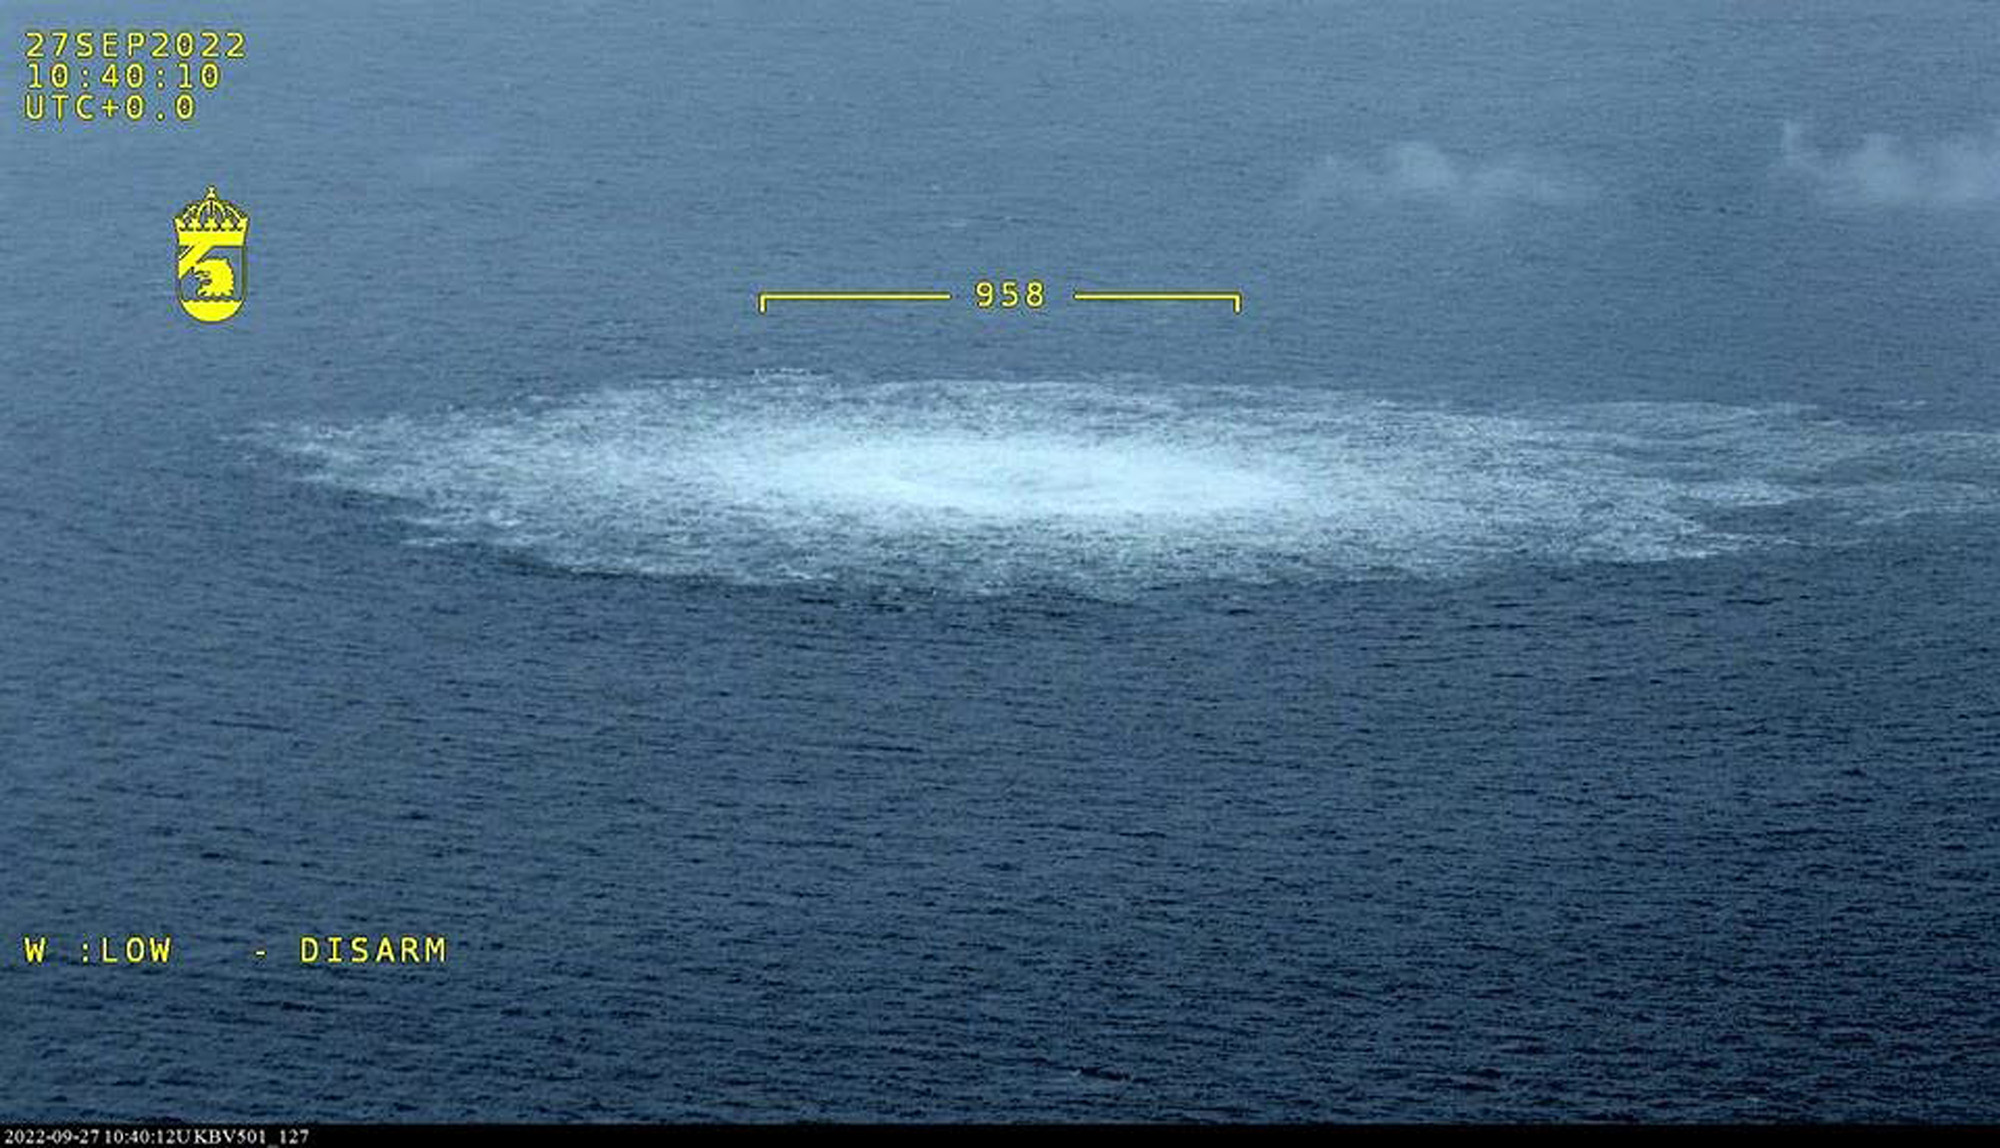 The release of gas emanating from a leak on the Nord Stream 2 gas pipeline in the Baltic Sea on September 27 is seen in this handout image provided by Swedish Coast Guard.